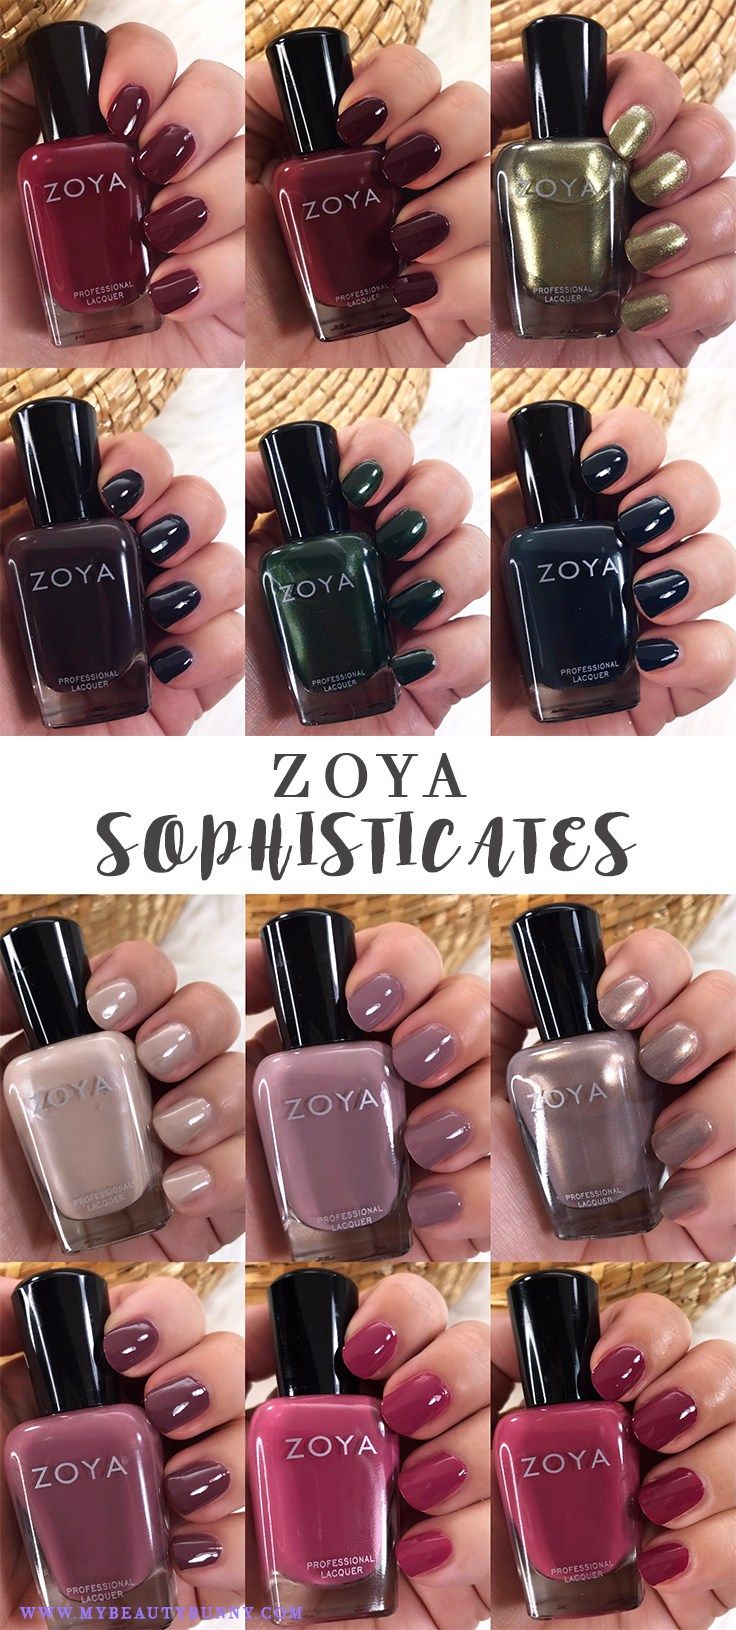 various nail polishes are shown in different colors and sizes, with the words zoya on